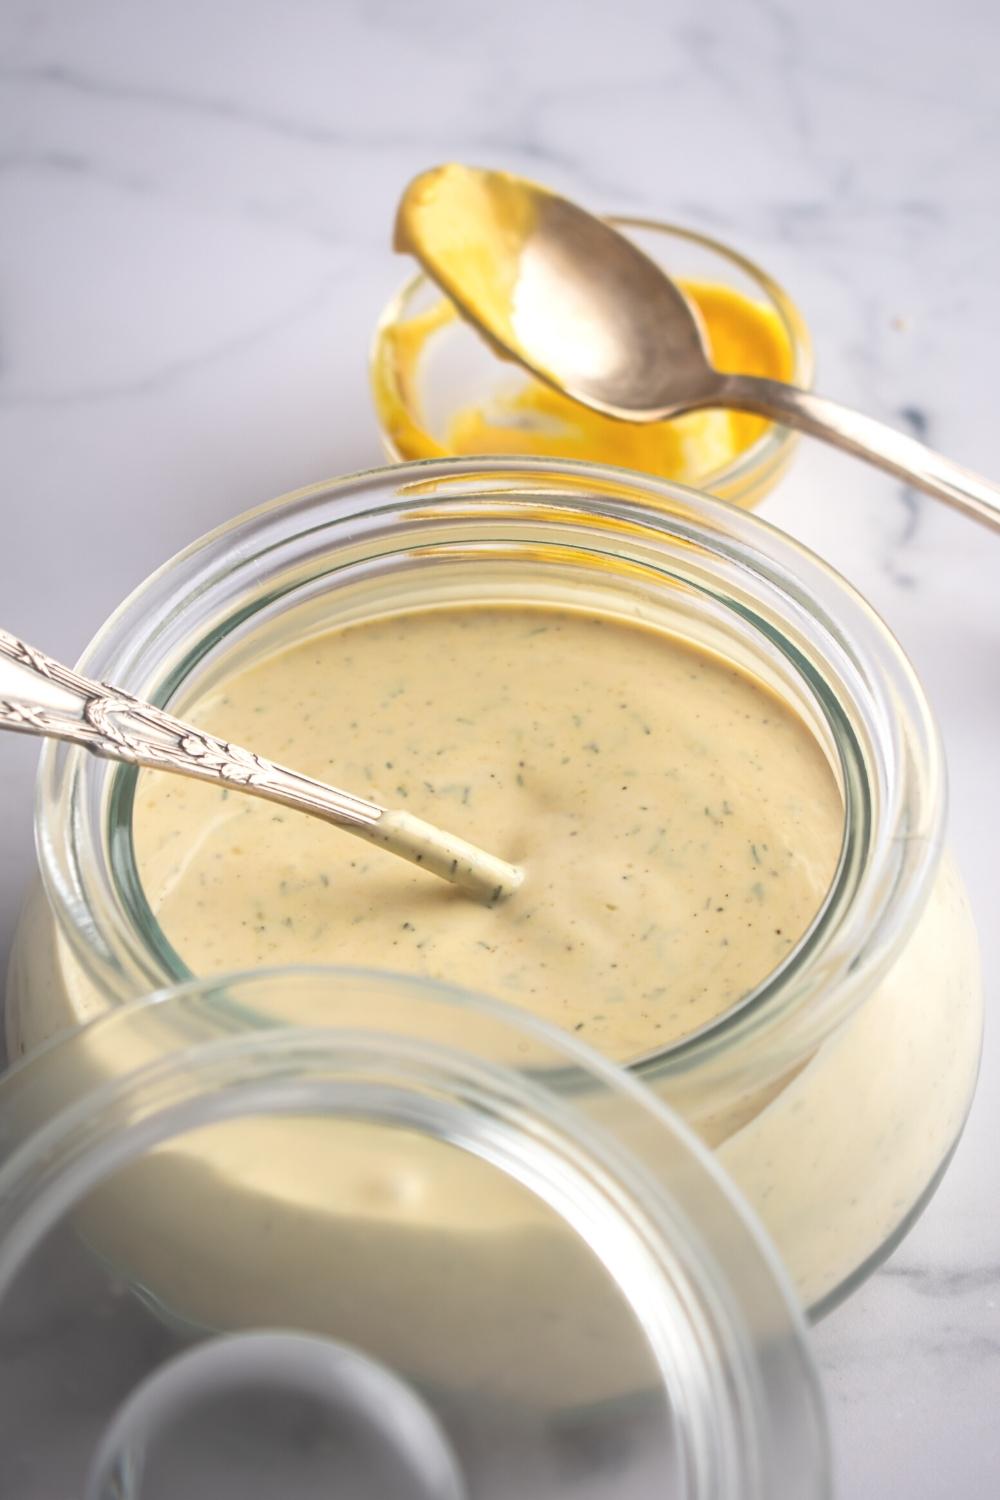 McDonald's breakfast sauce in a glass jar with a spoon submerged in the sauce. Behind it is a glass cup filled with mustard with a spoon on top.